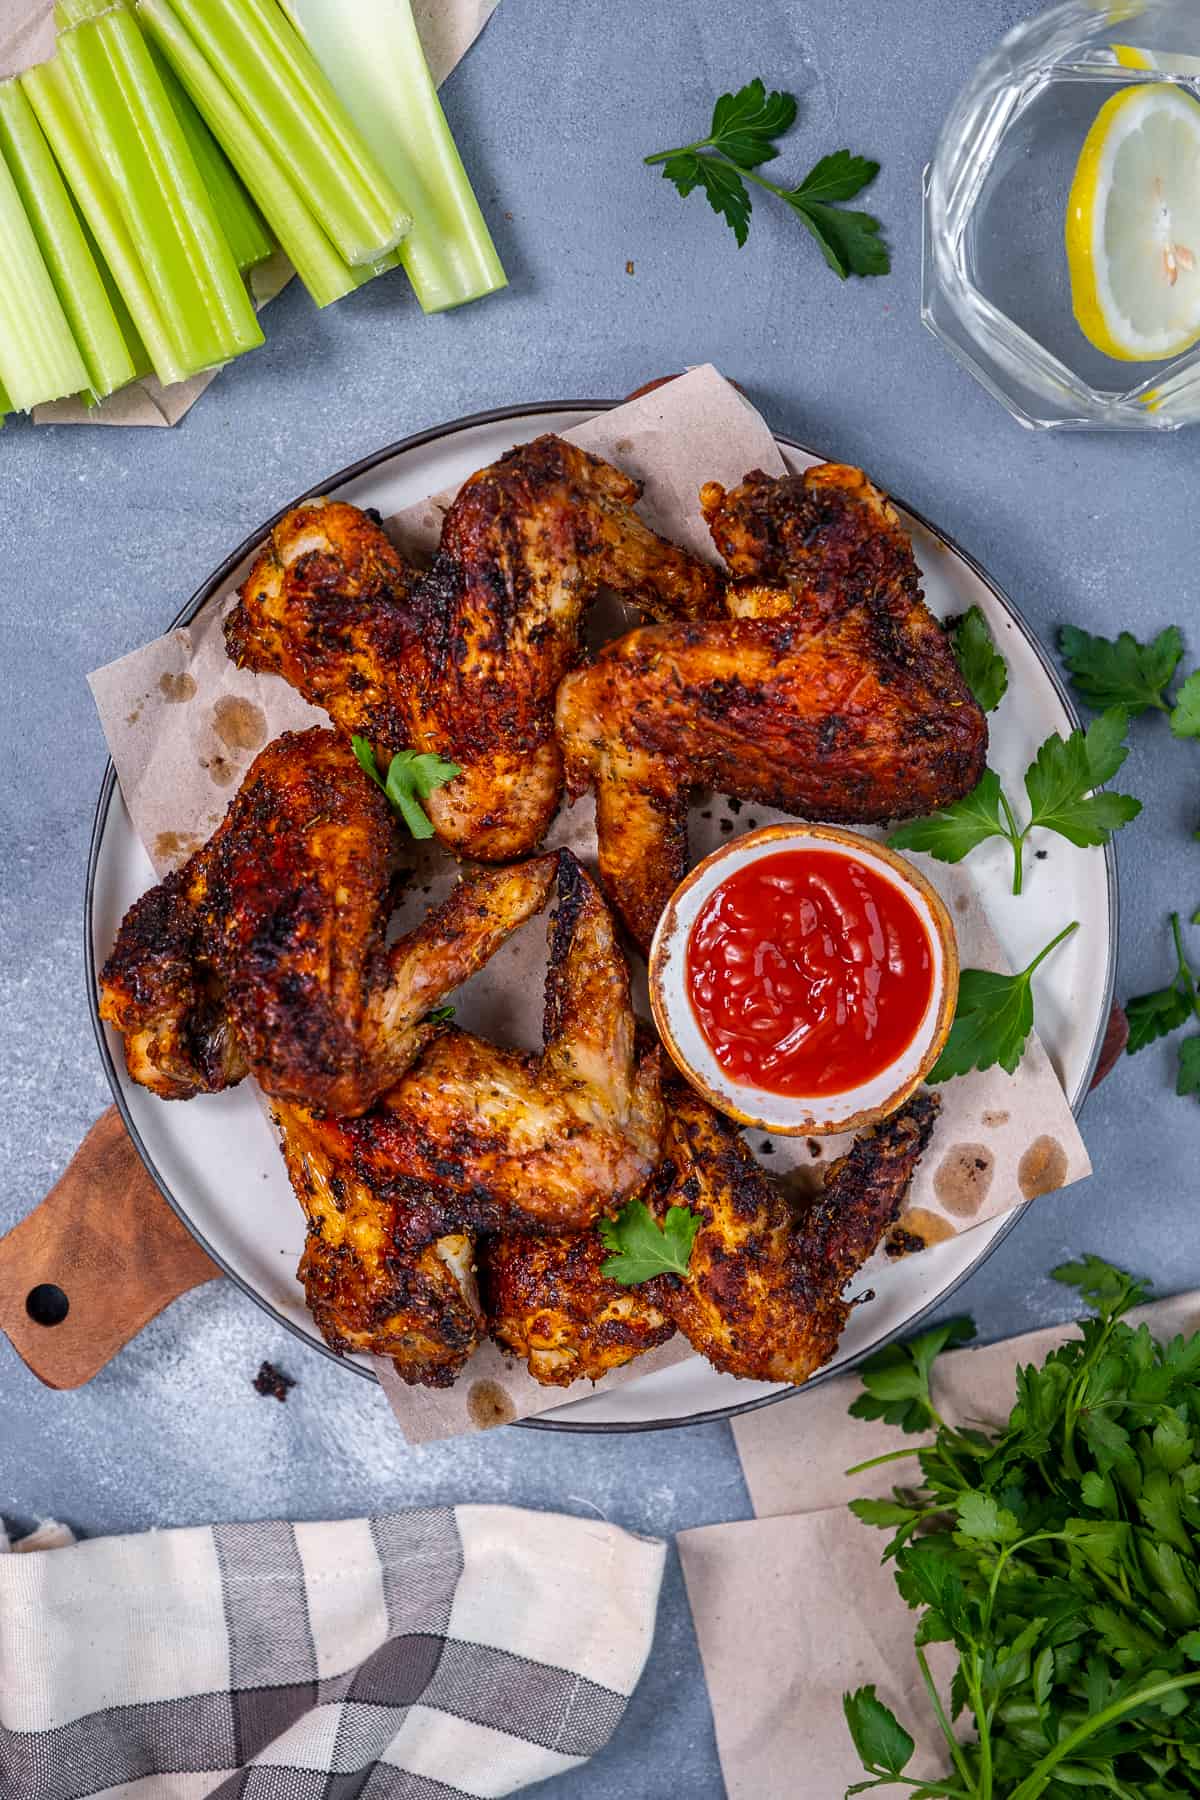 Whole chicken wings garnished with parsley and served with hot sauce on a white plate, celery sticks on the side.